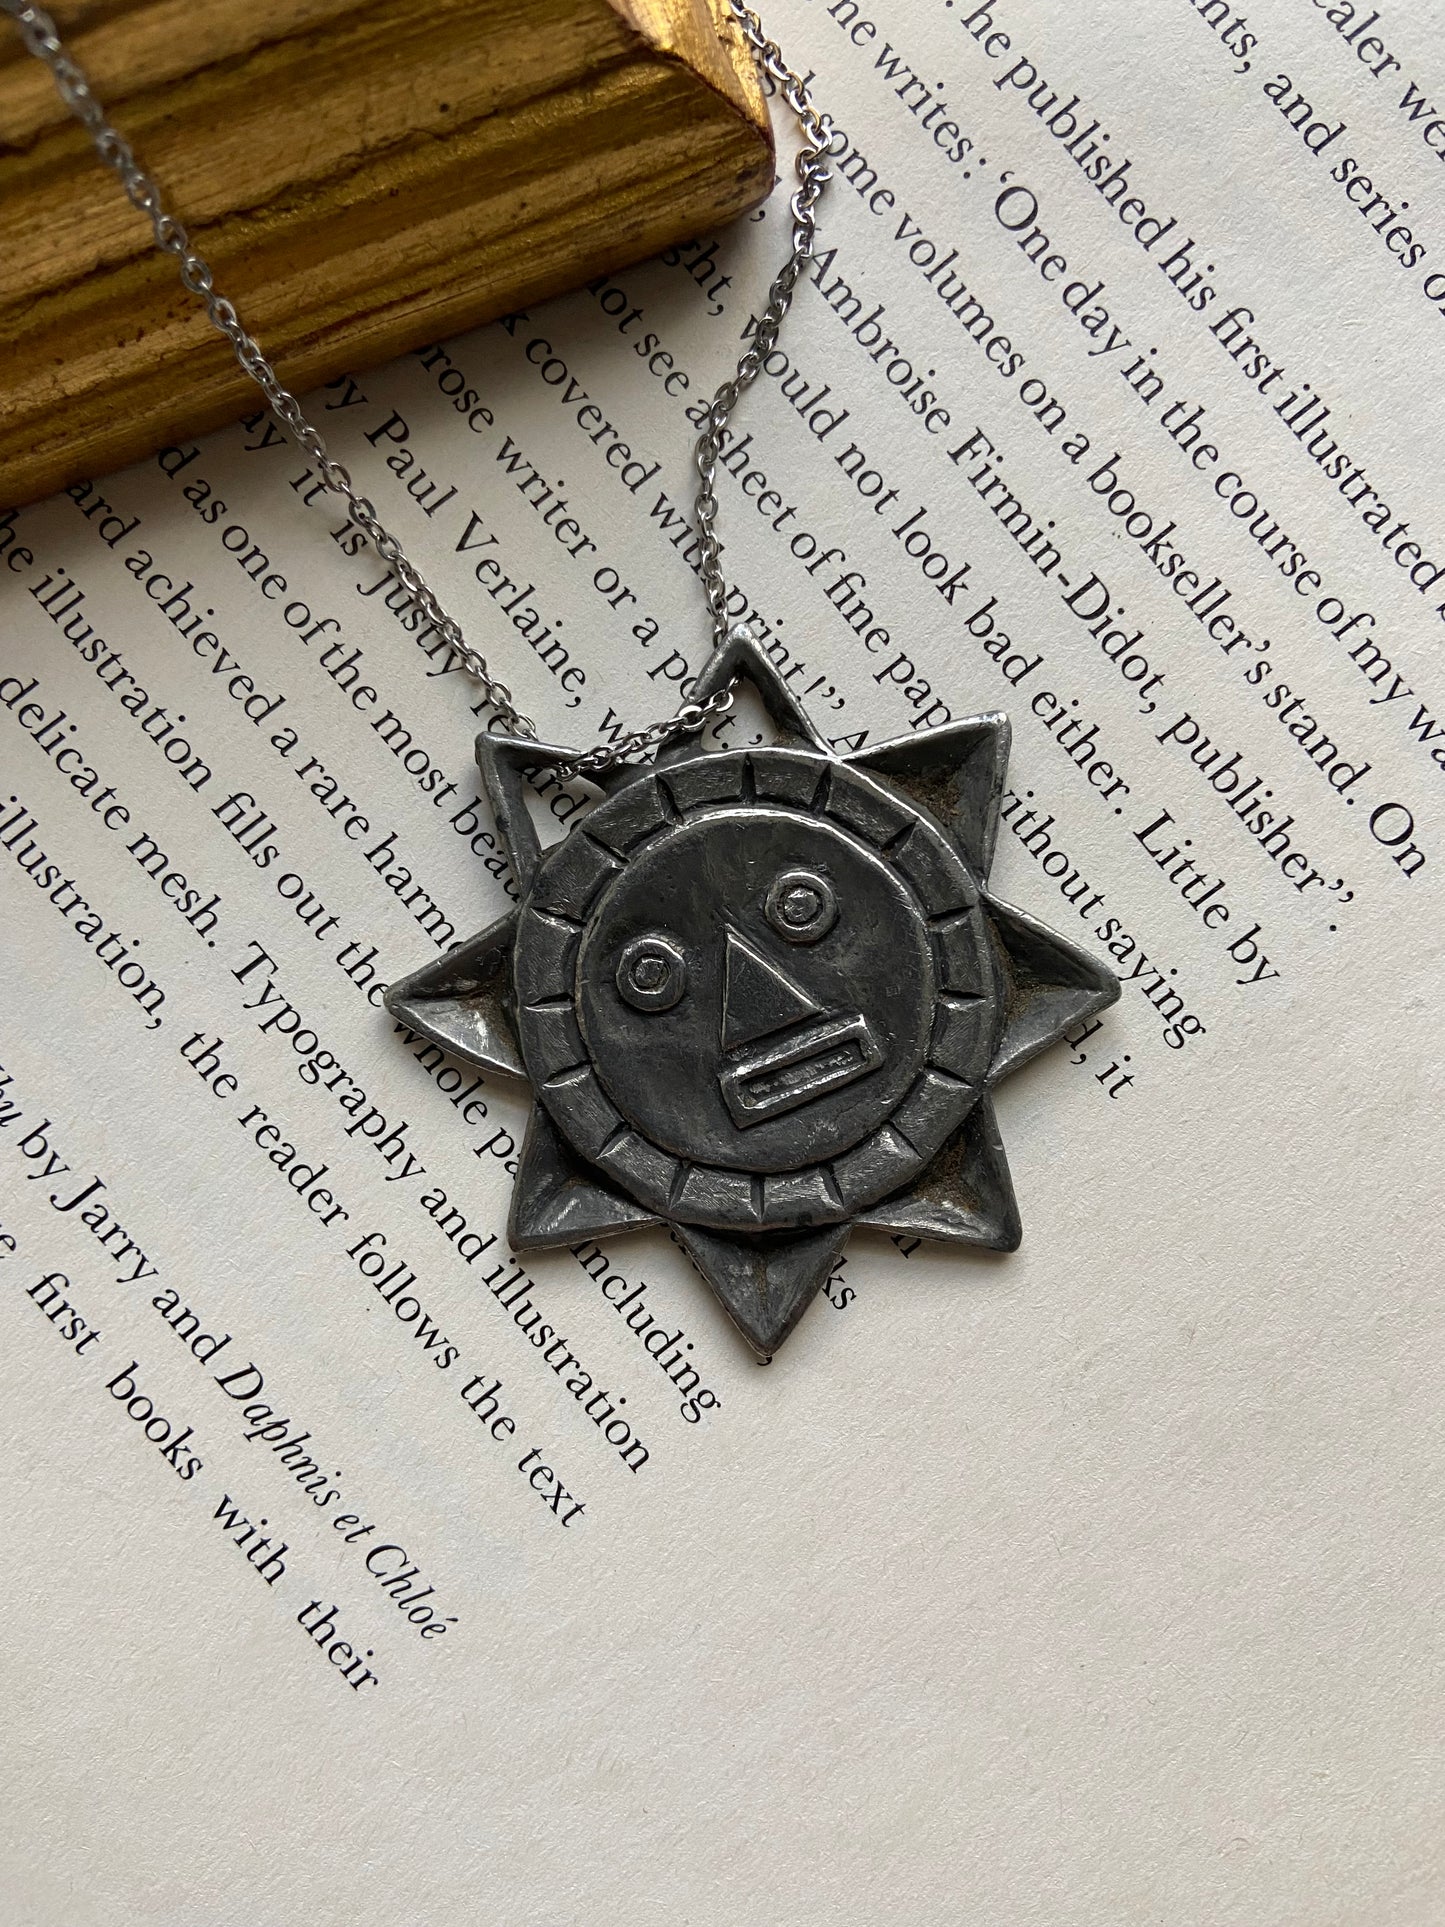 One-of-one | vintage carved silver sun stainless steel necklace